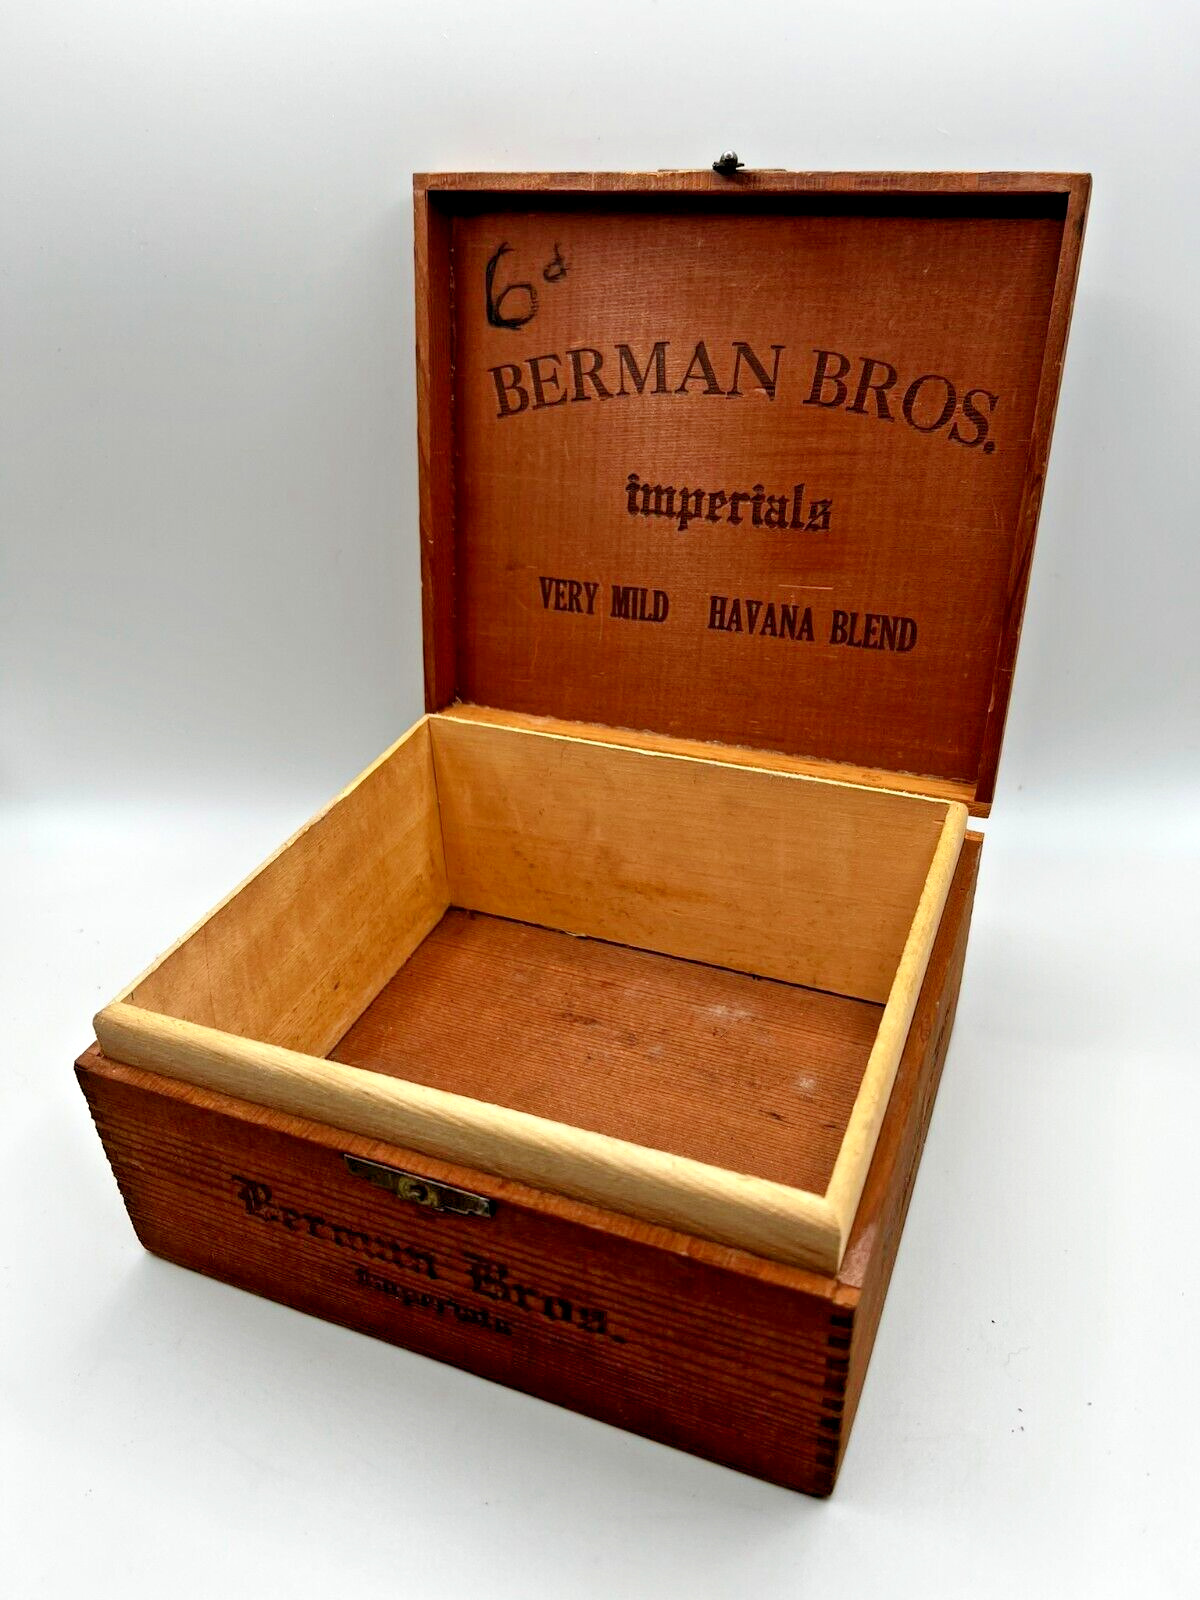 Early 1900s Antique Dovetail Cigar Box Berman Bros Imperials Penna Solid Wood